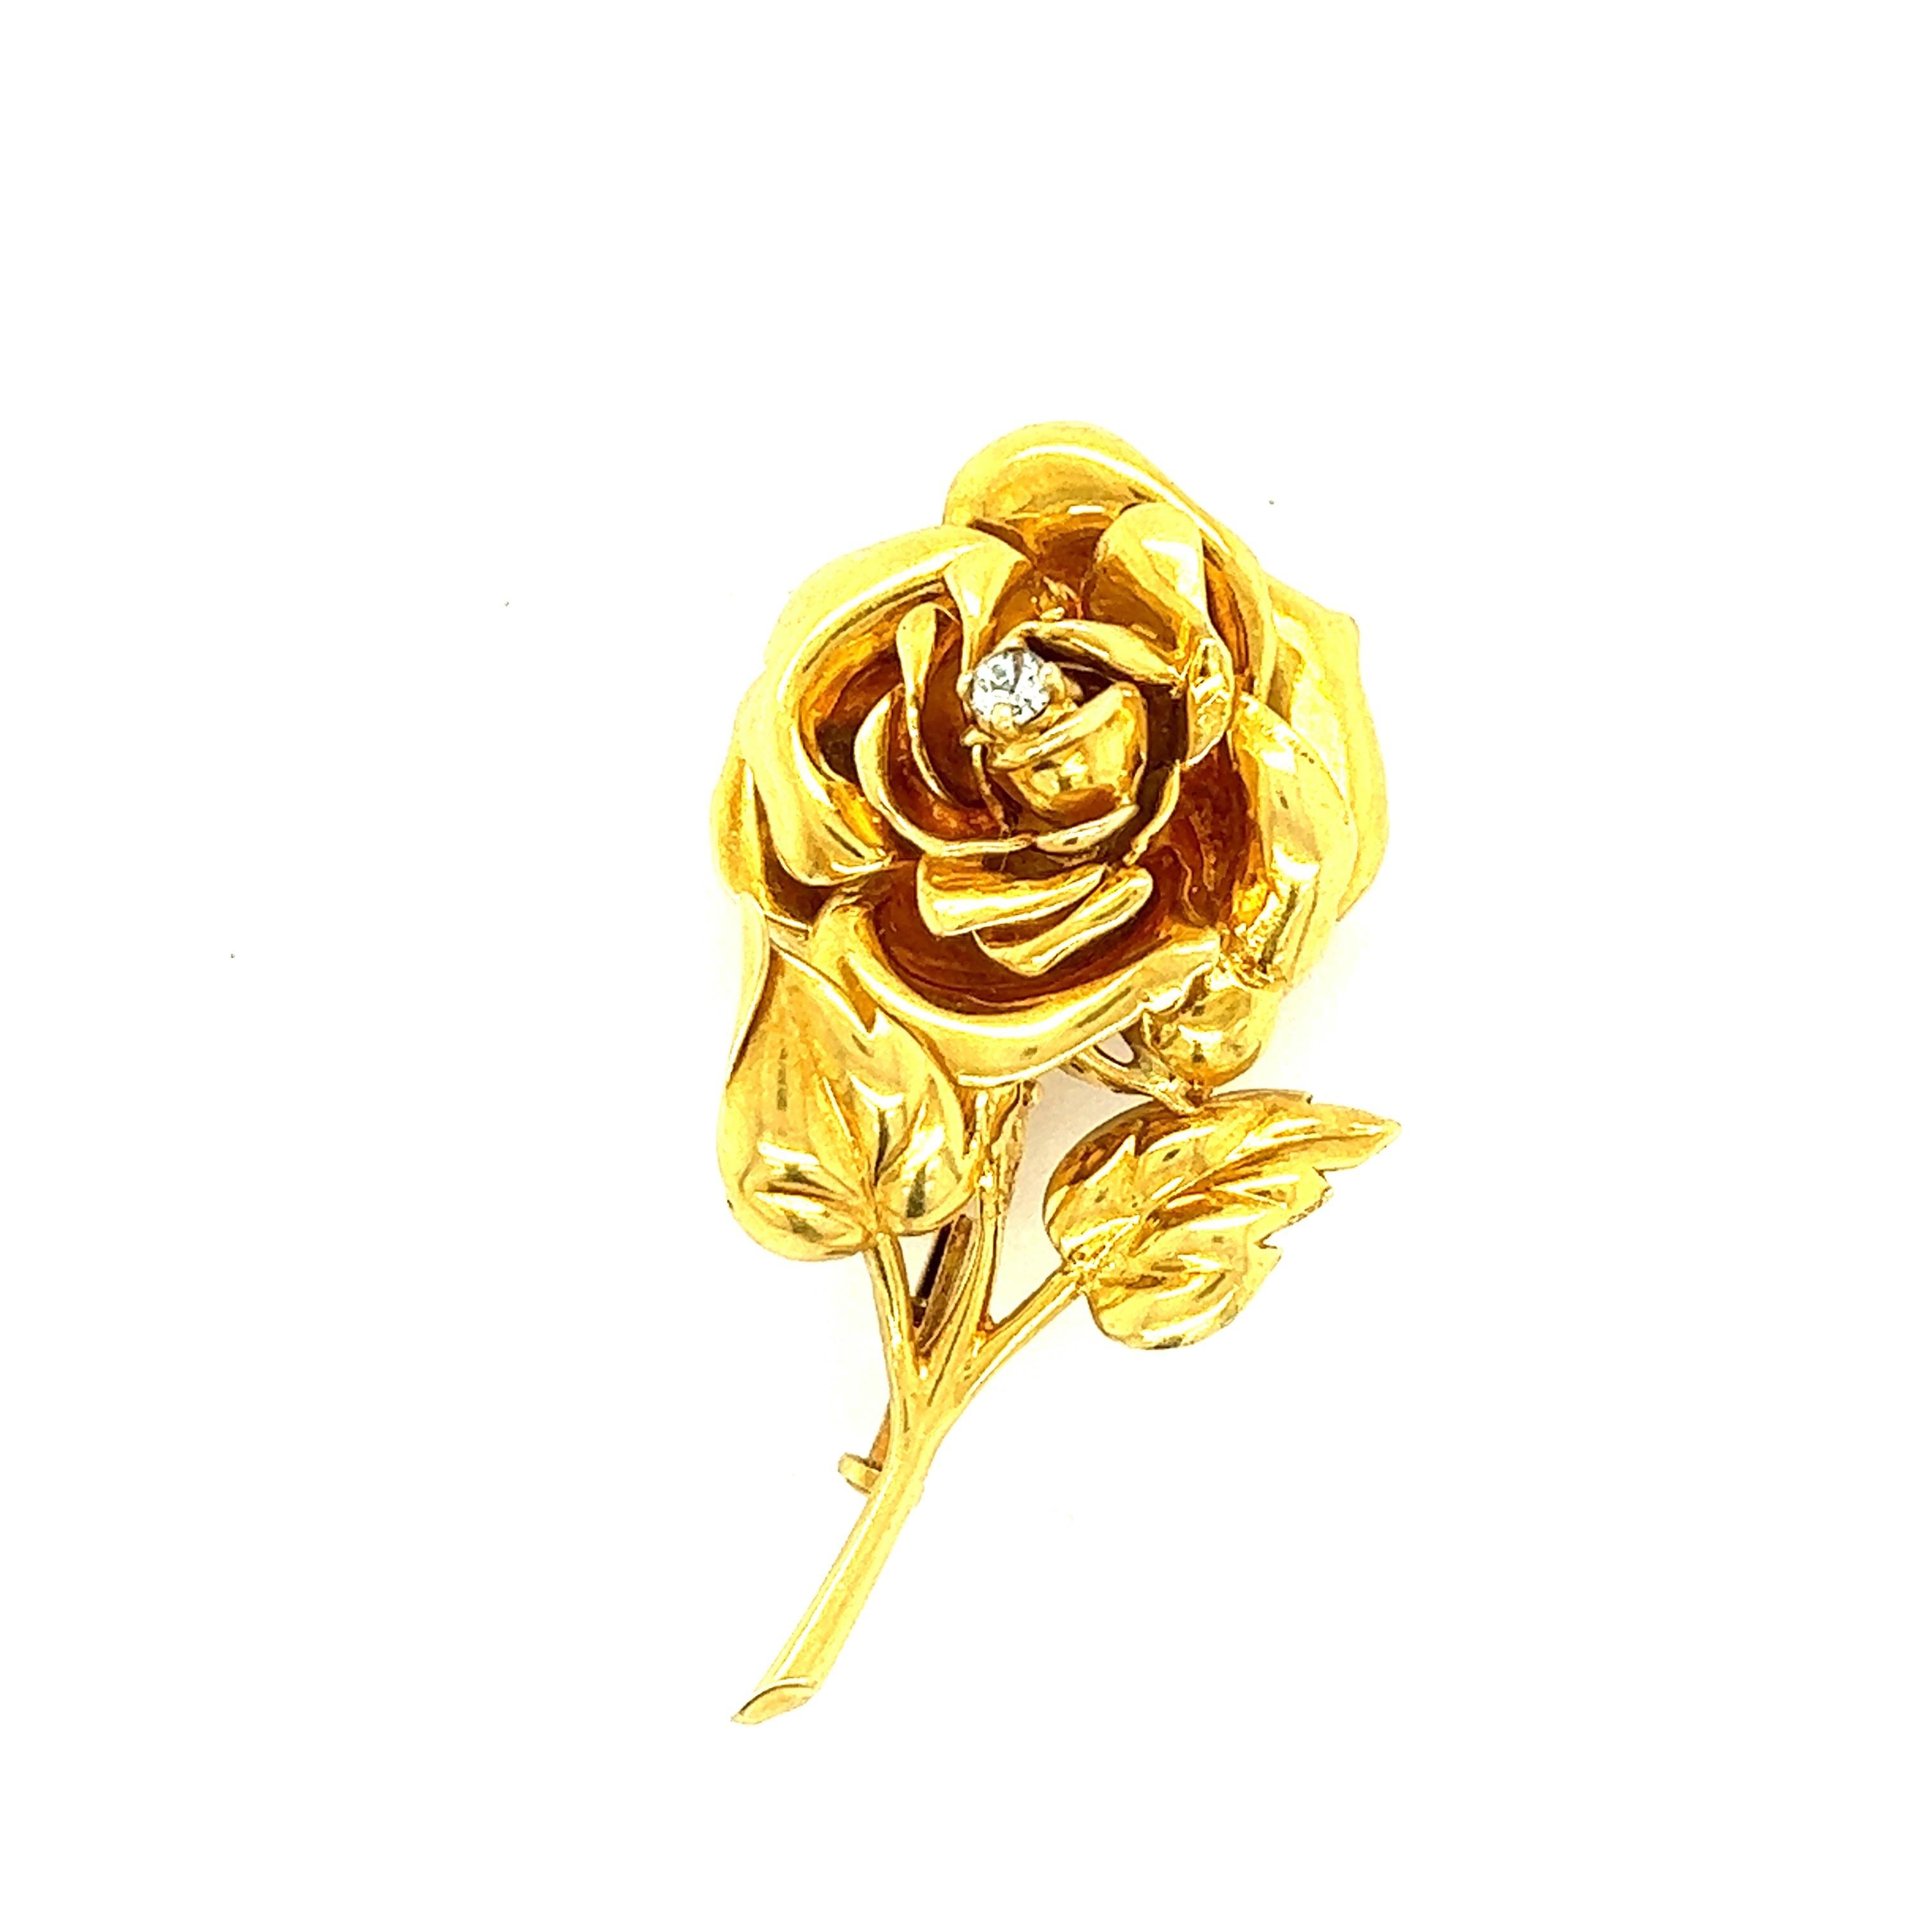 Cartier Diamond 18k Yellow Gold Rose Brooch

One small round-cut diamond of approximately 0.10 carat, beautiful rose motif, made of 18 karat yellow gold; marked Cartier, 750, Swiss made, 2327 (light)

Size: length 4.5 cm, width 2.4 cm
Total weight: